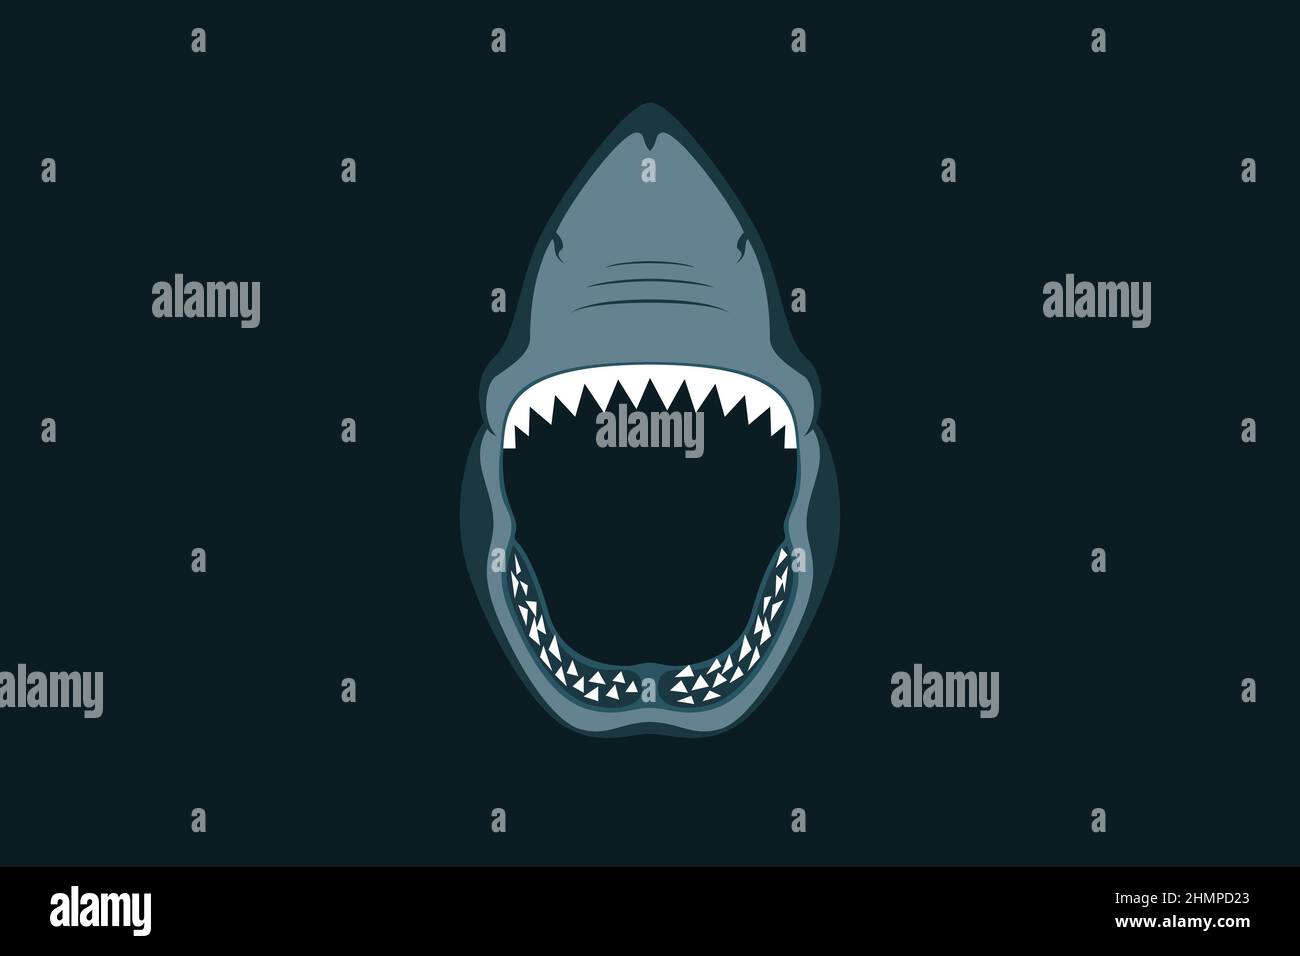 Jaw of Great White Shark from the Deep Dark Blue Stock Vector